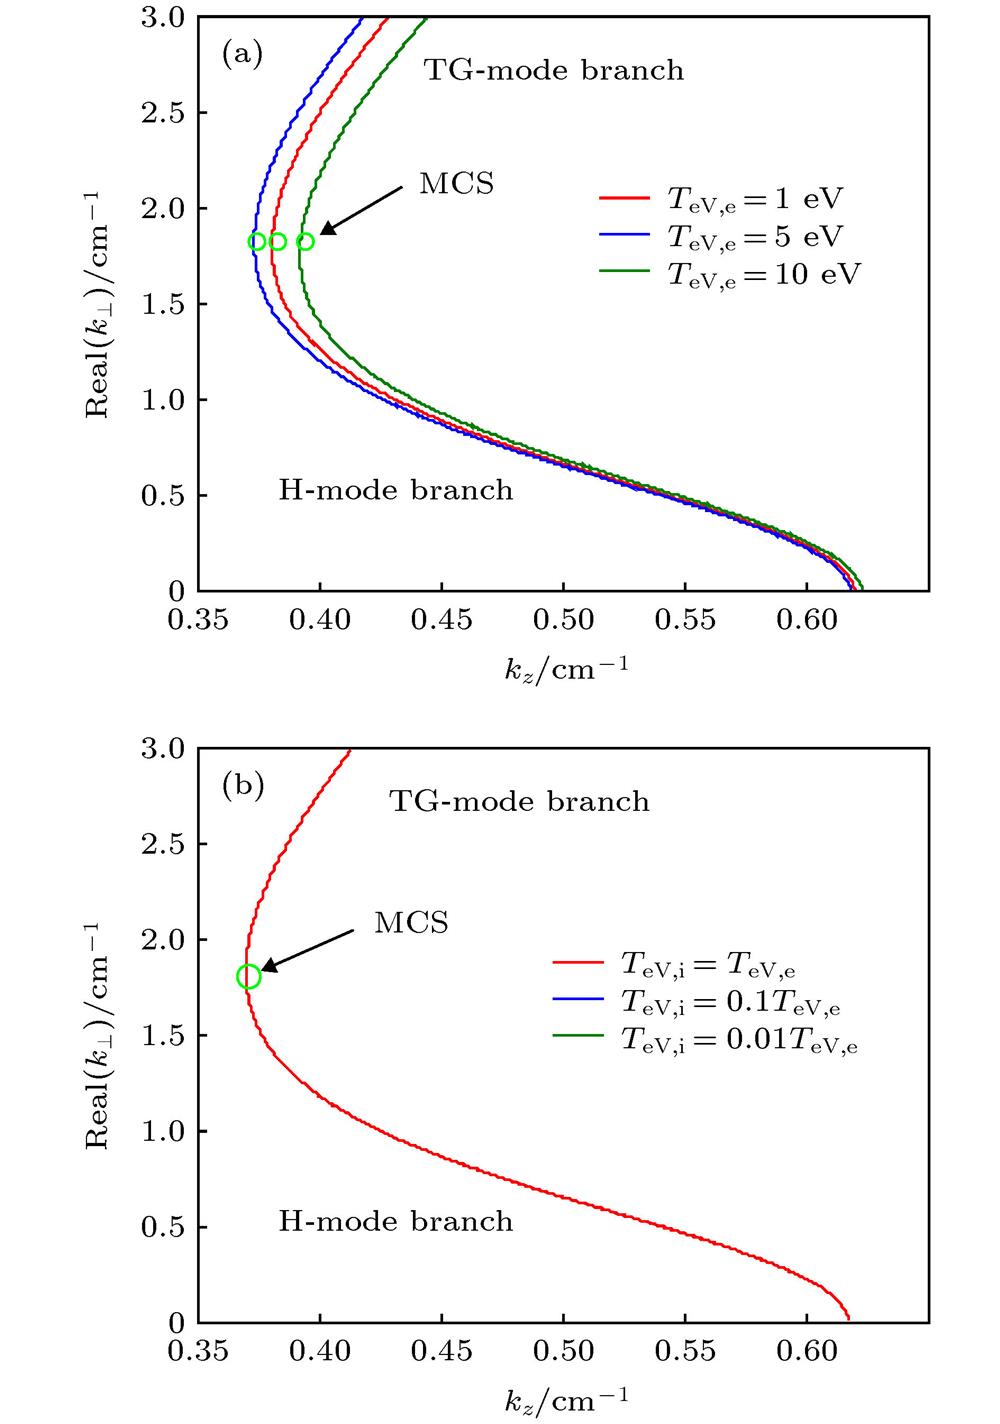 Influence of particle temperature on dispersion relation between helicon and TG waves: (a) Electron temperature effect; (b) ion temperature effect.